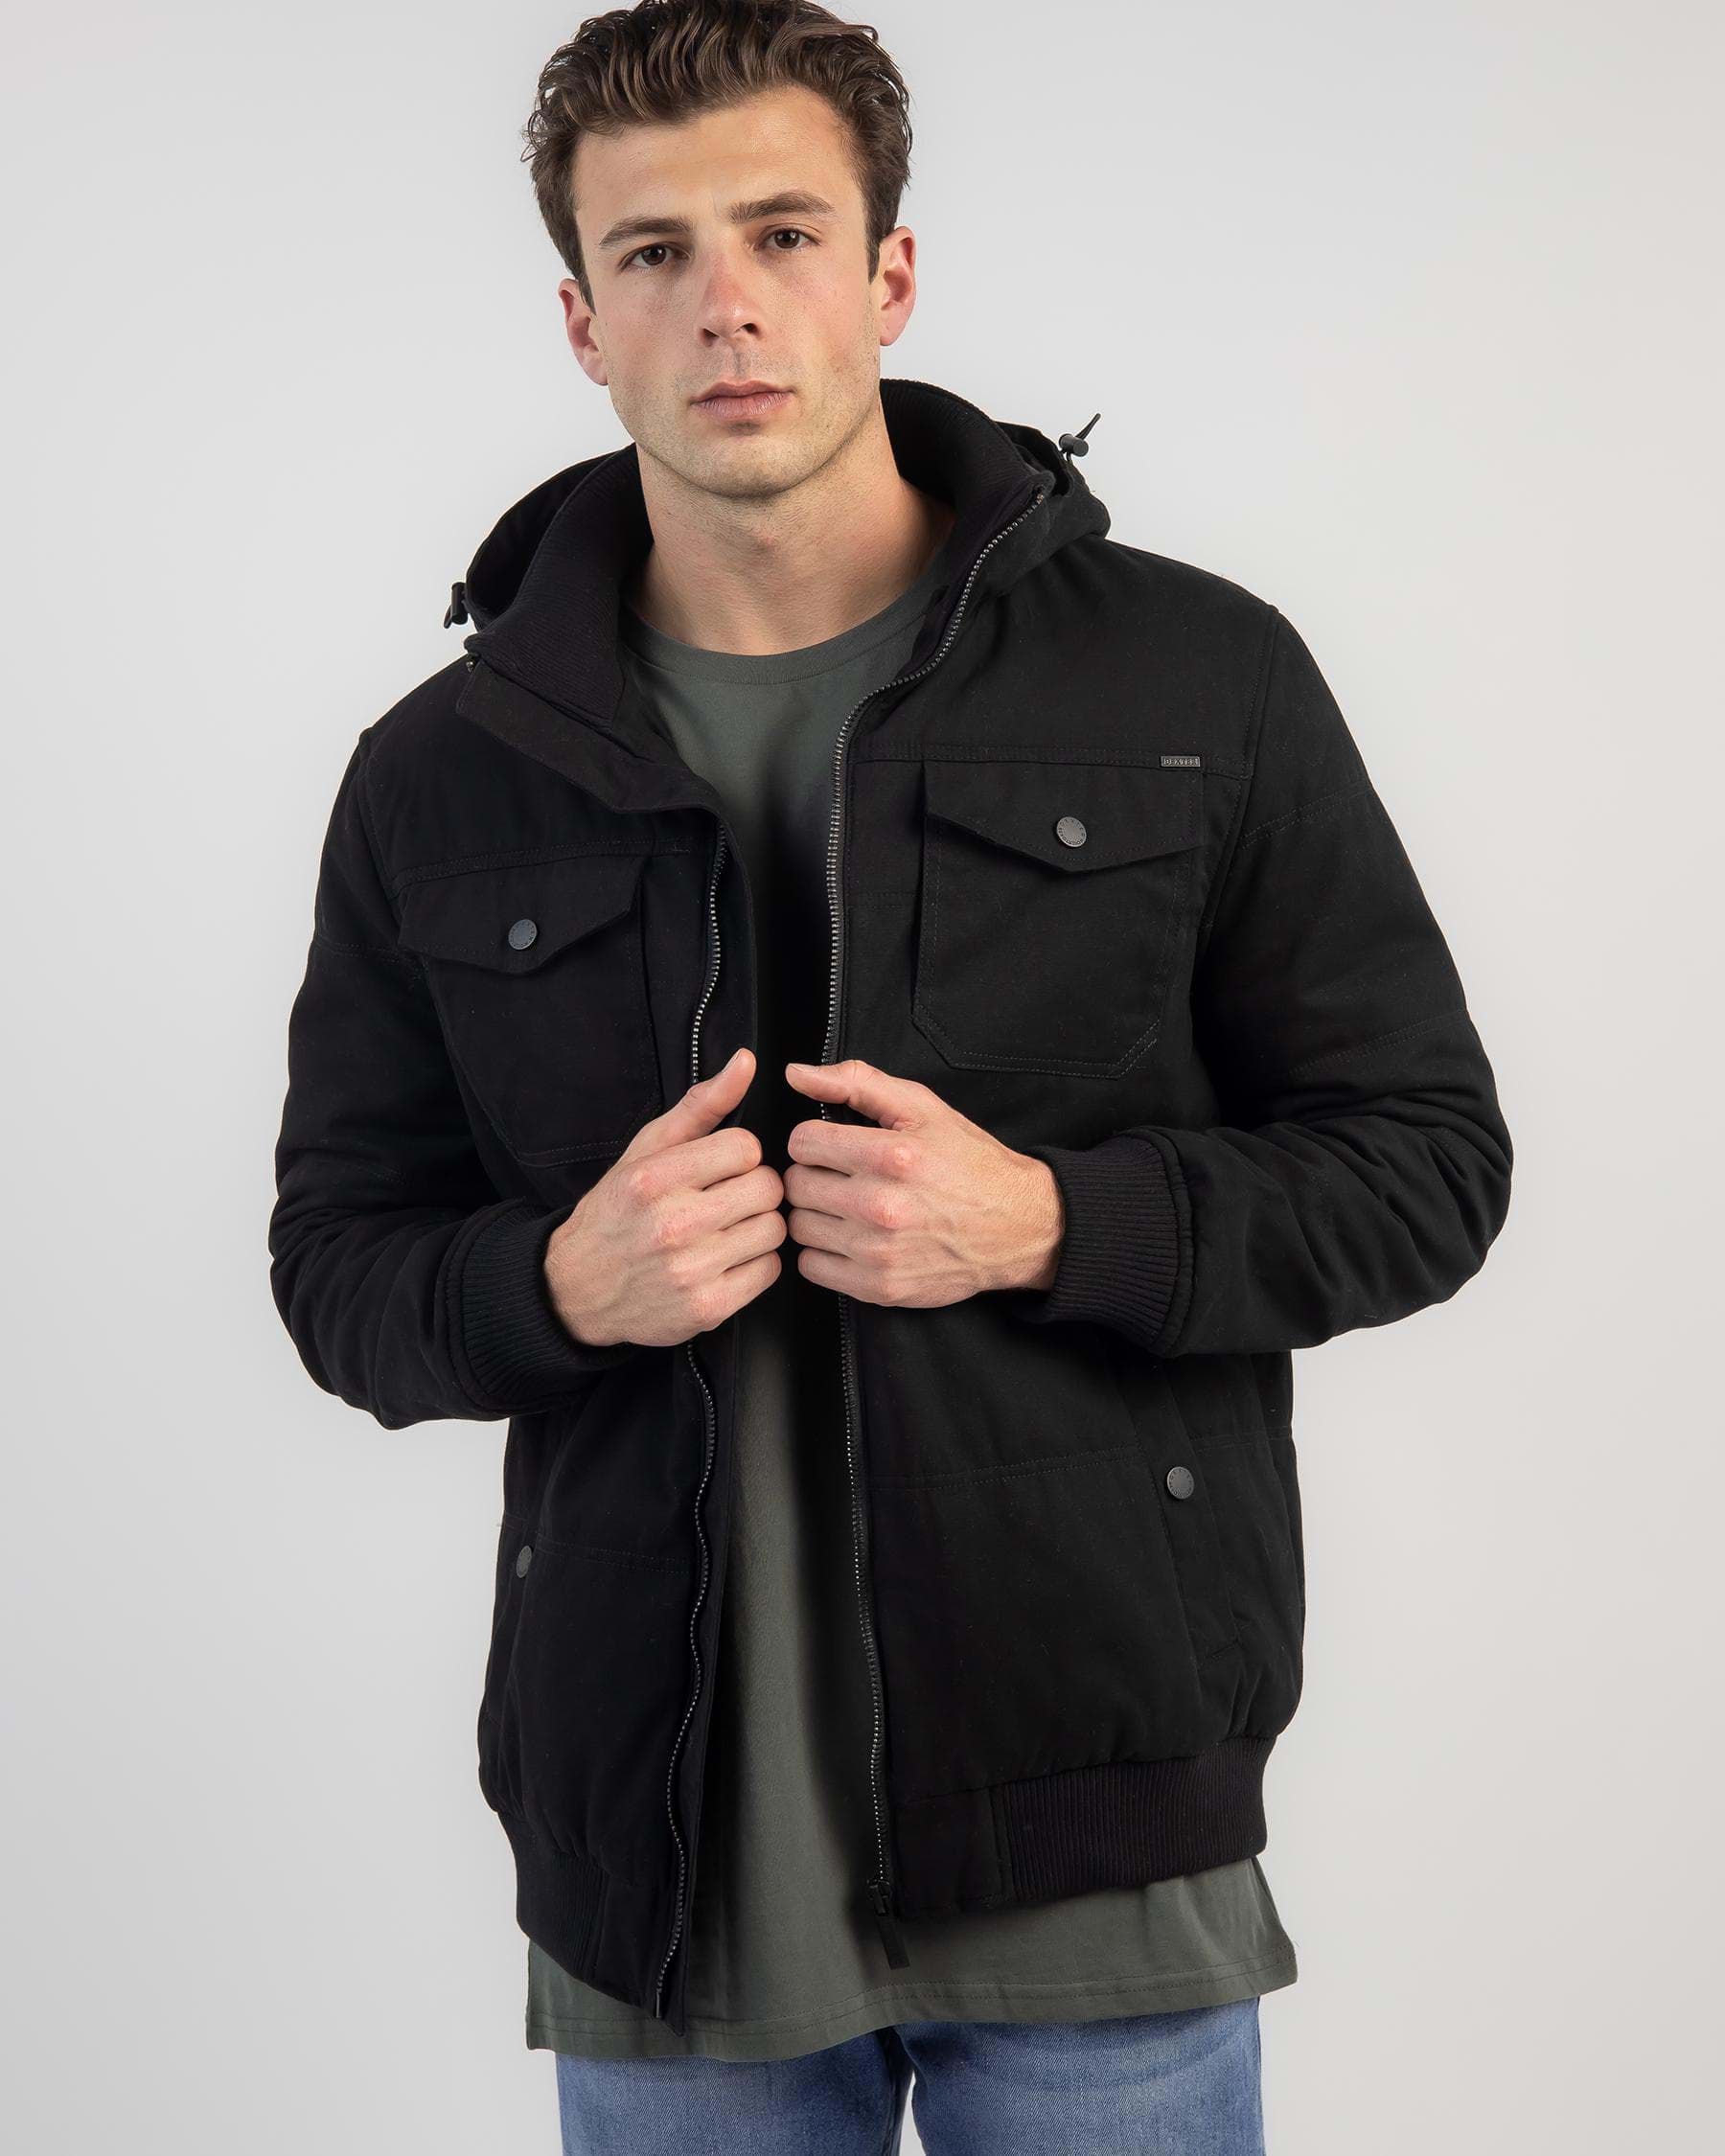 Dexter Acquisition Hooded Jacket In Black - Fast Shipping & Easy ...